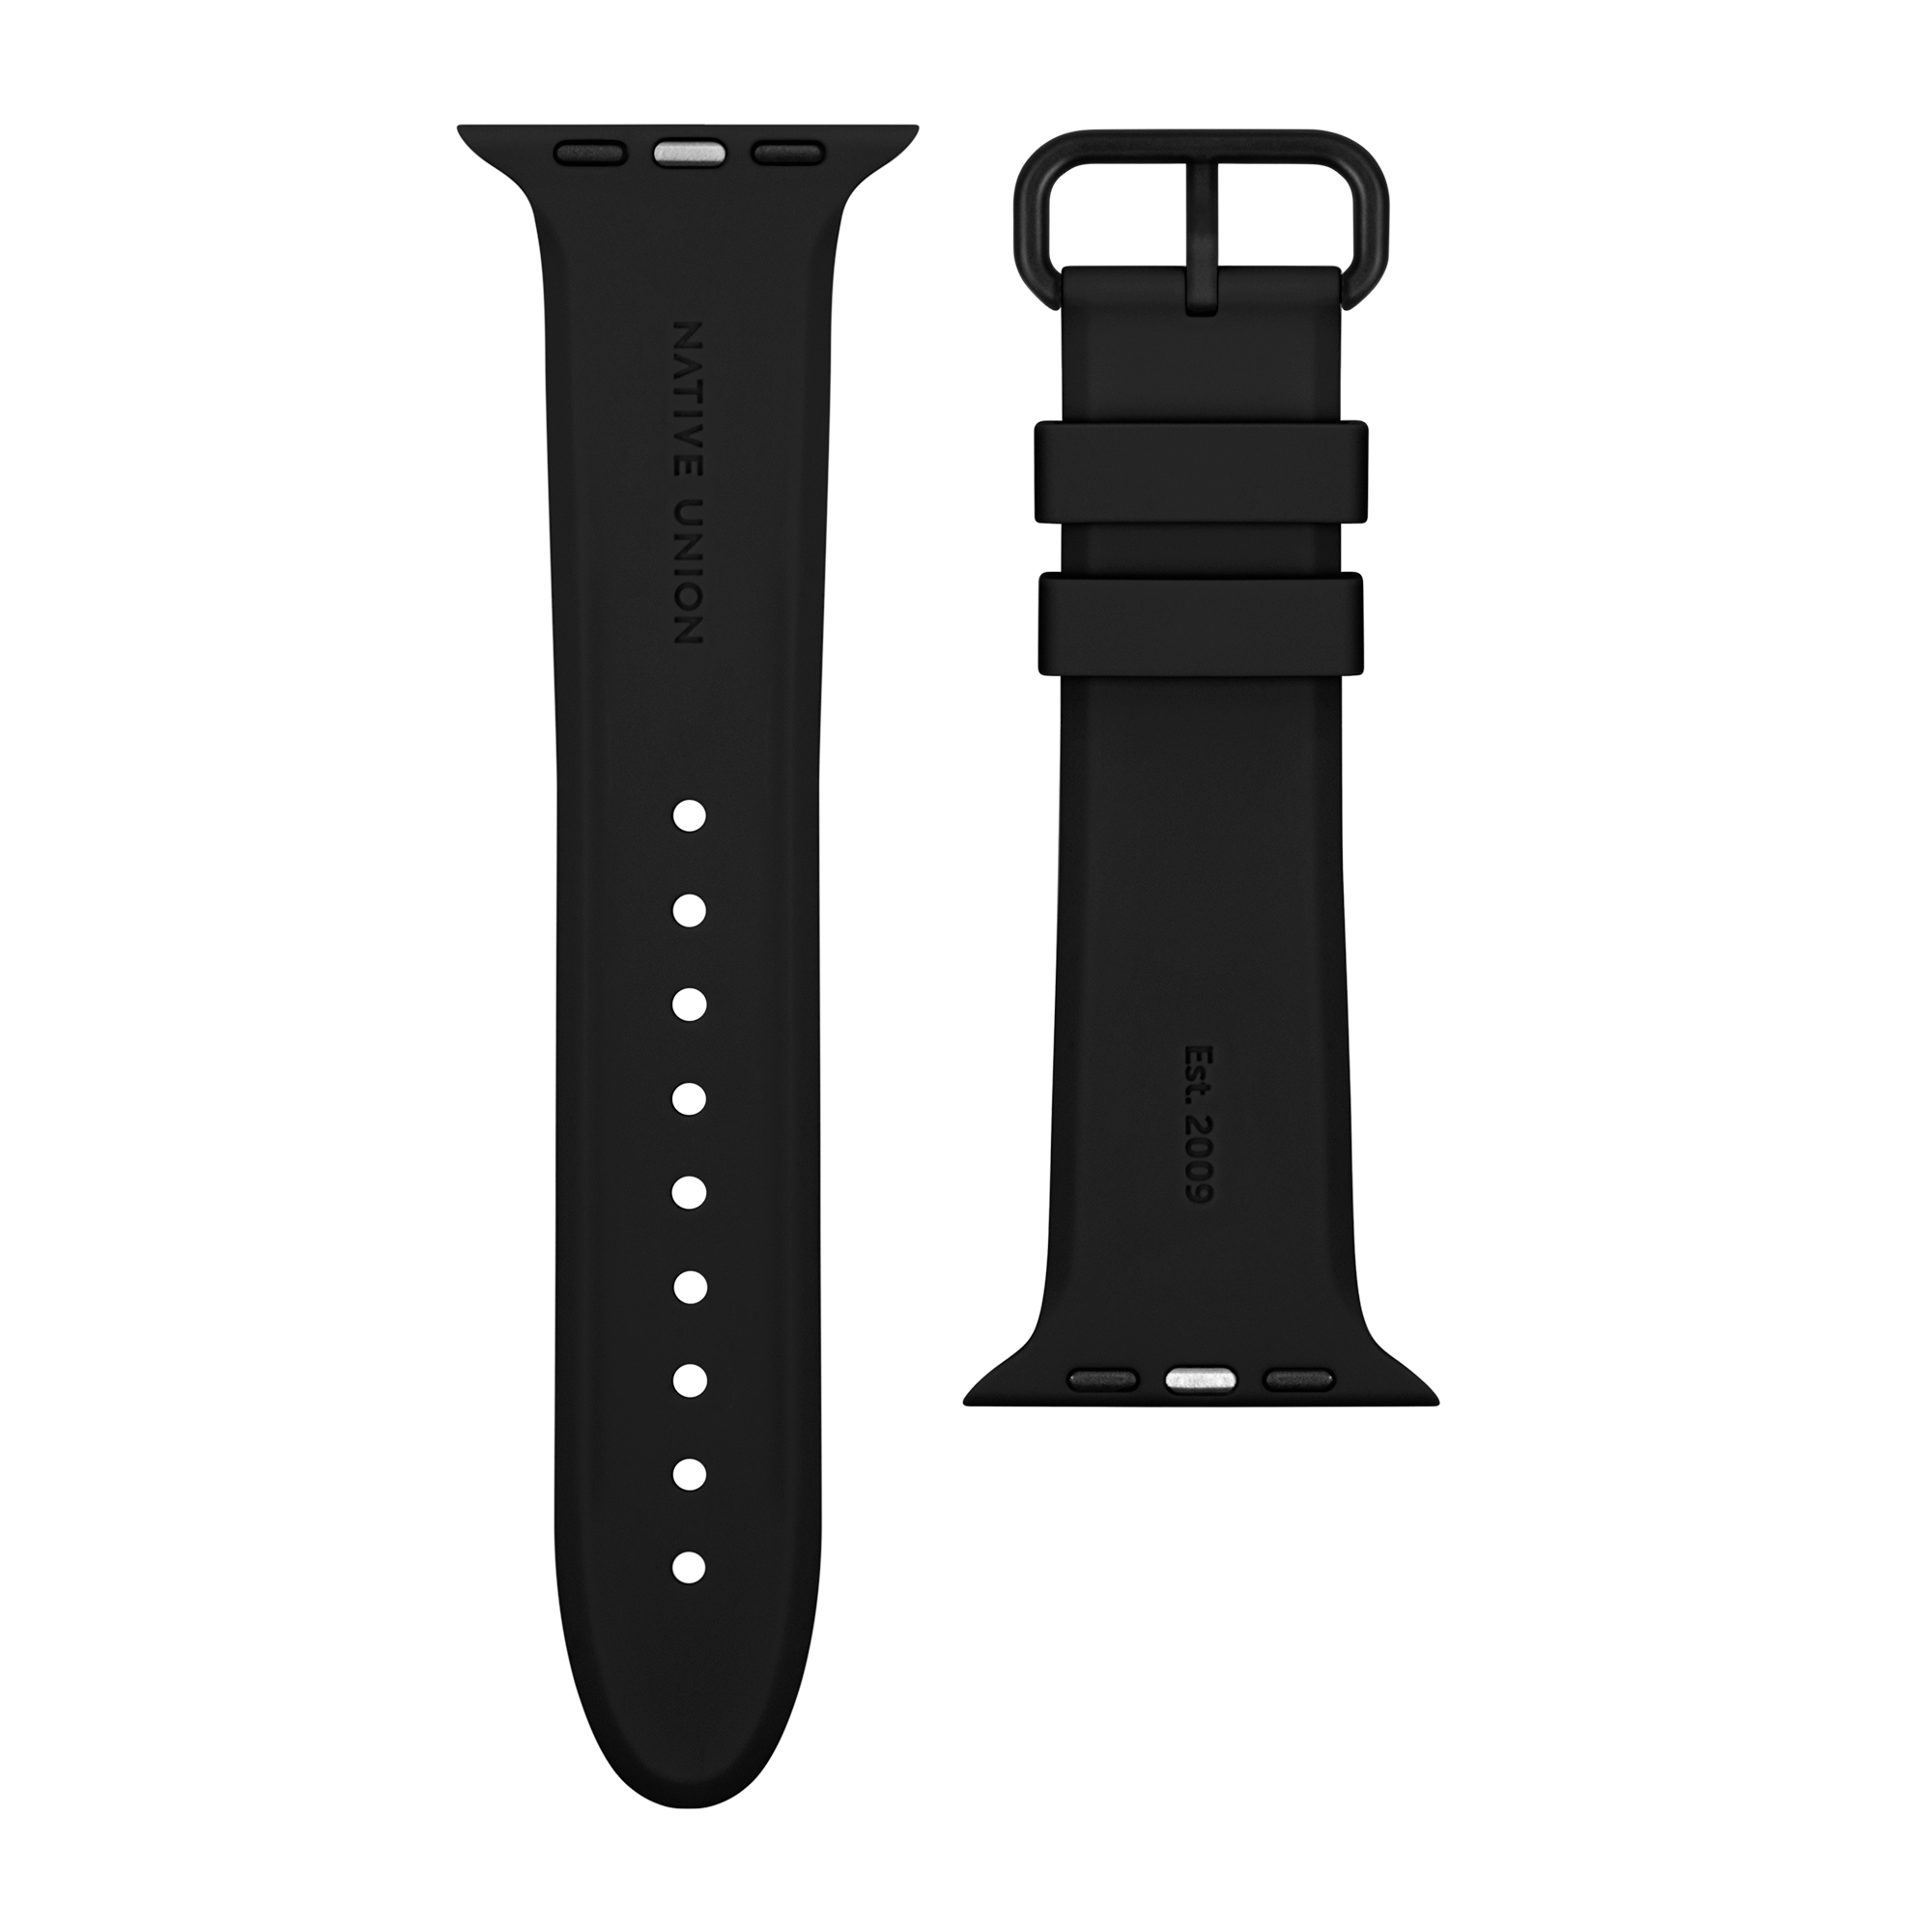 CURVE STRAP FOR APPLE WATCH - BLACK